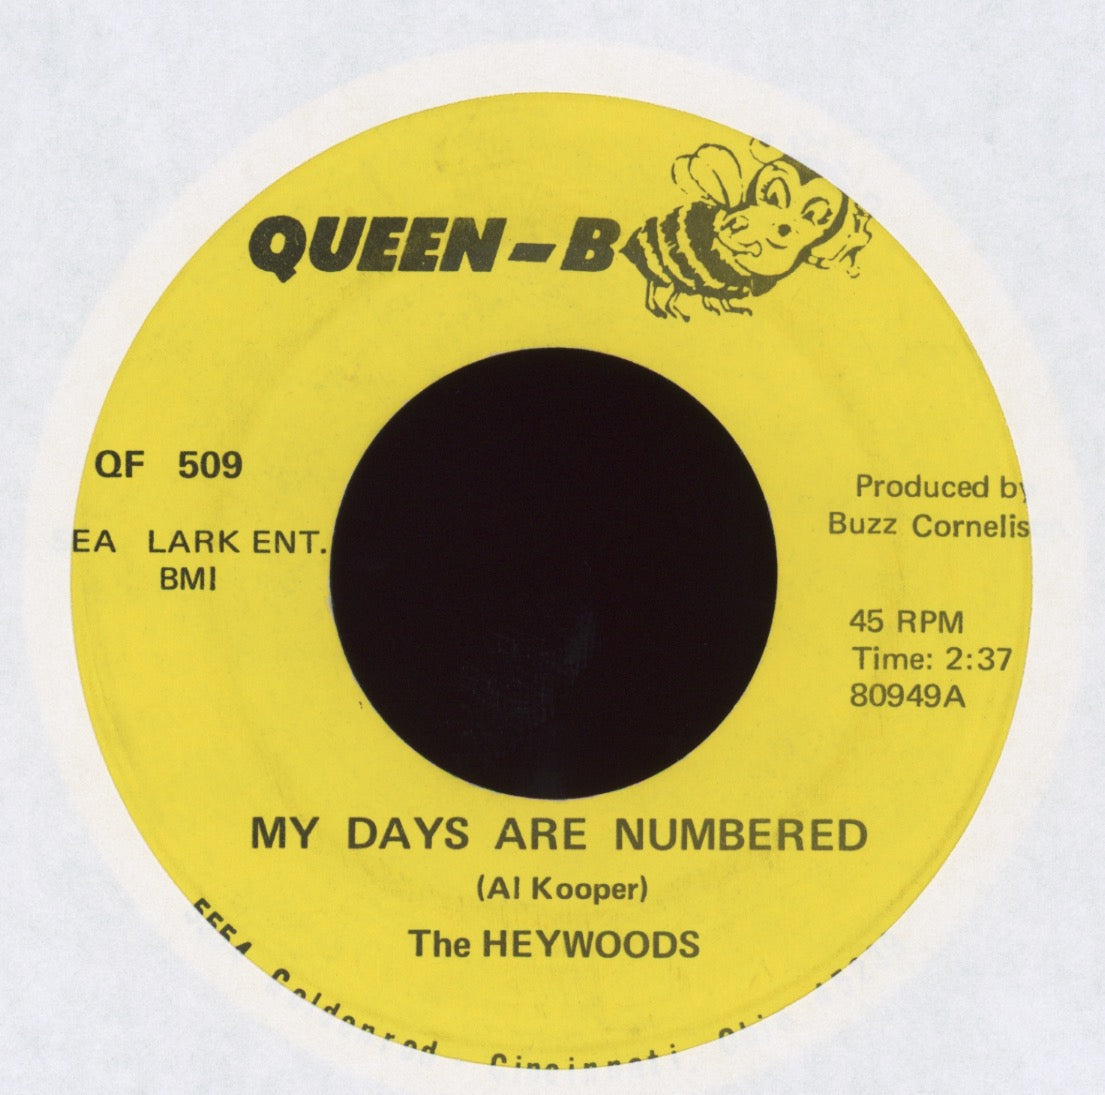 Bo Donaldson & The Heywoods - My Days Are Numbered on Queen B